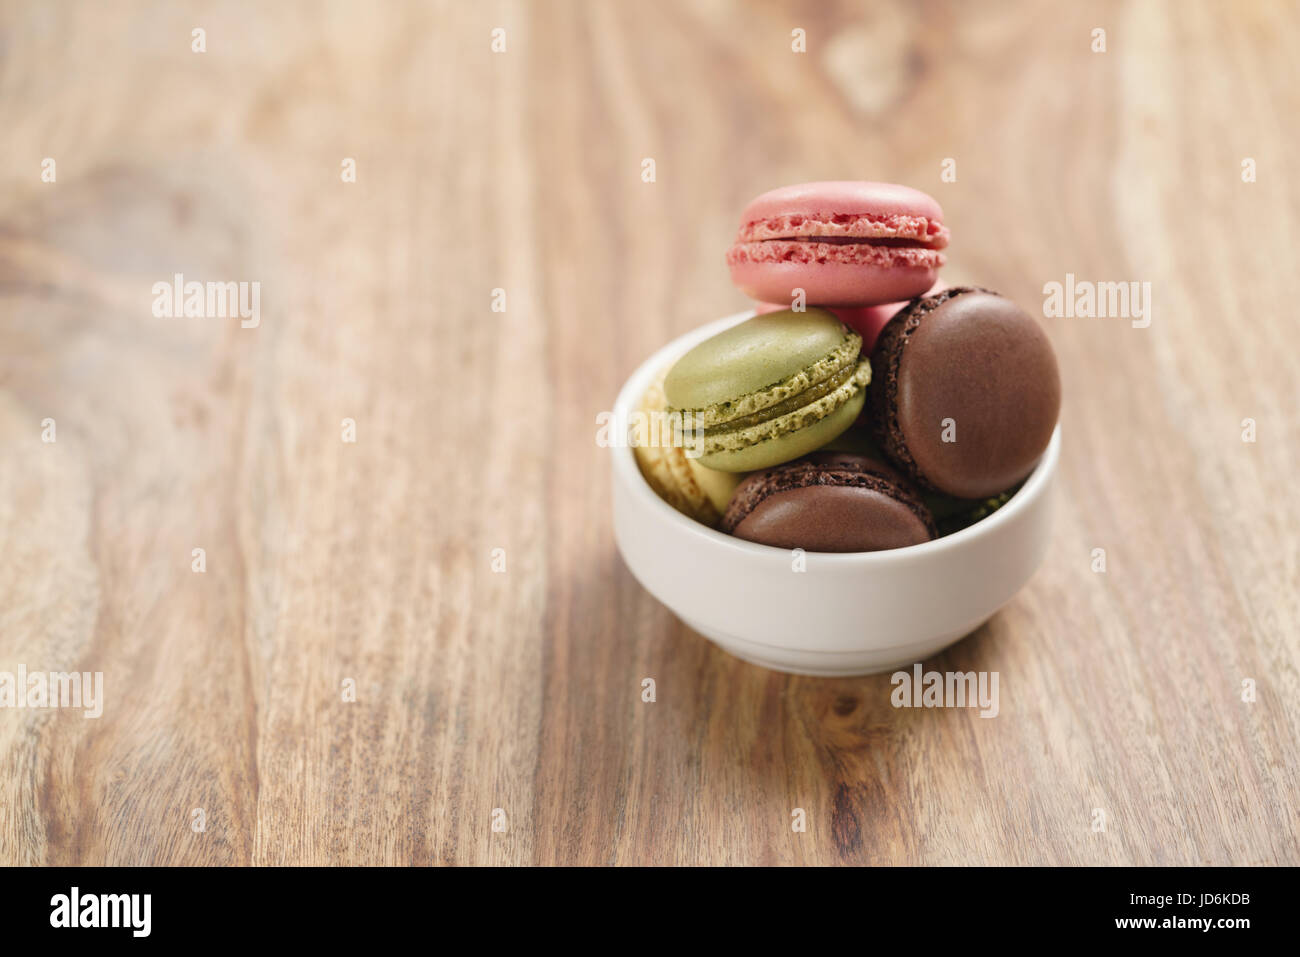 assorted macarons in white bowl on wooden table Stock Photo